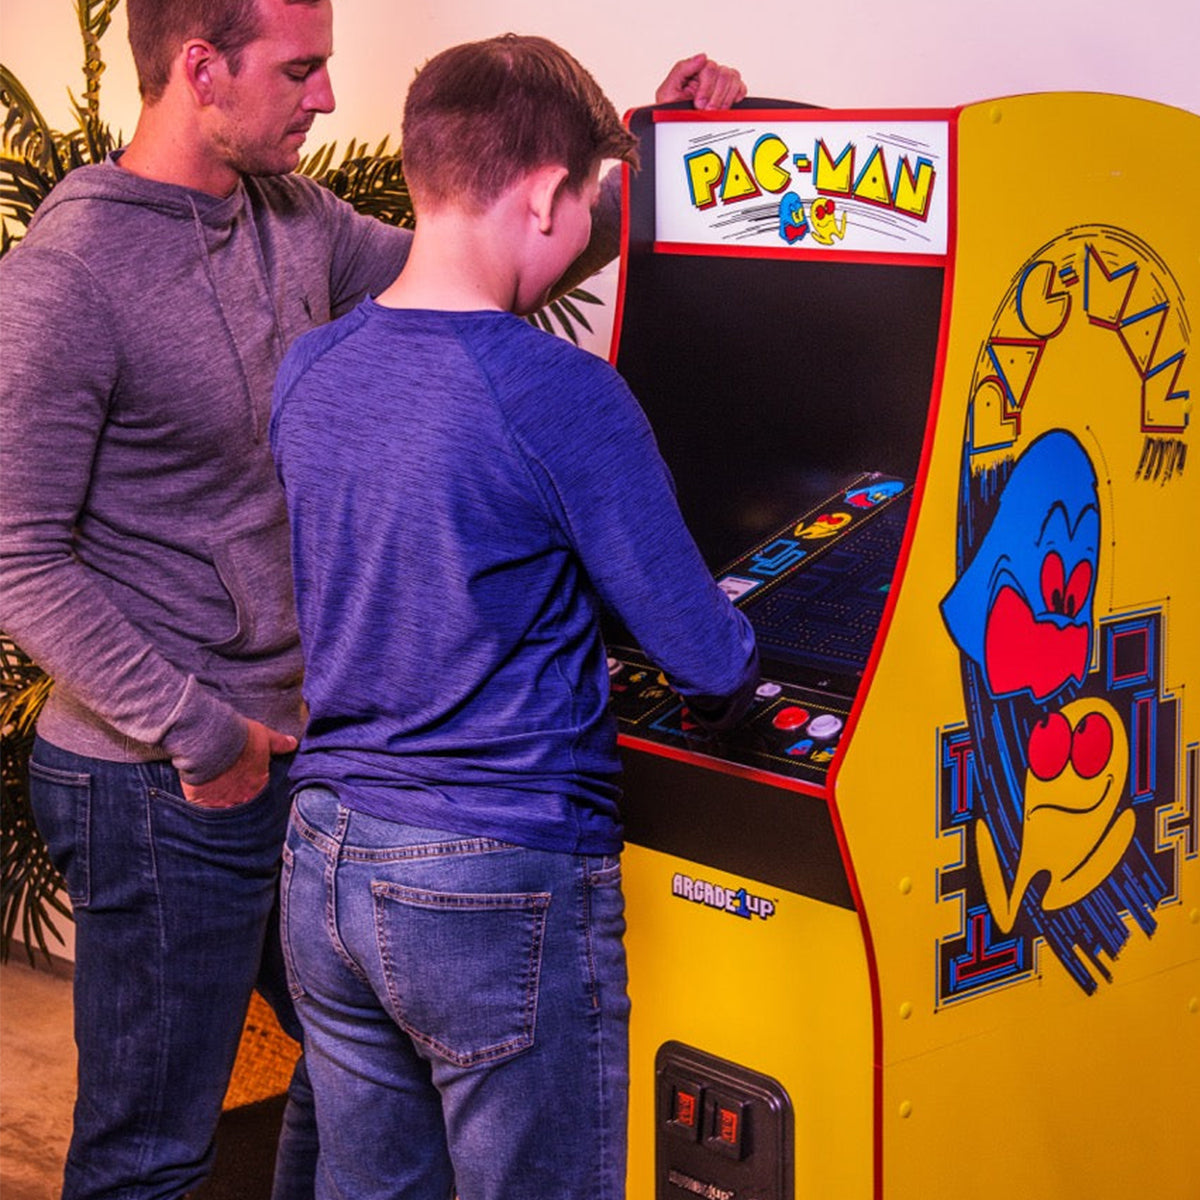 Arcade1Up Pac-Man Legacy Class of 81' Deluxe